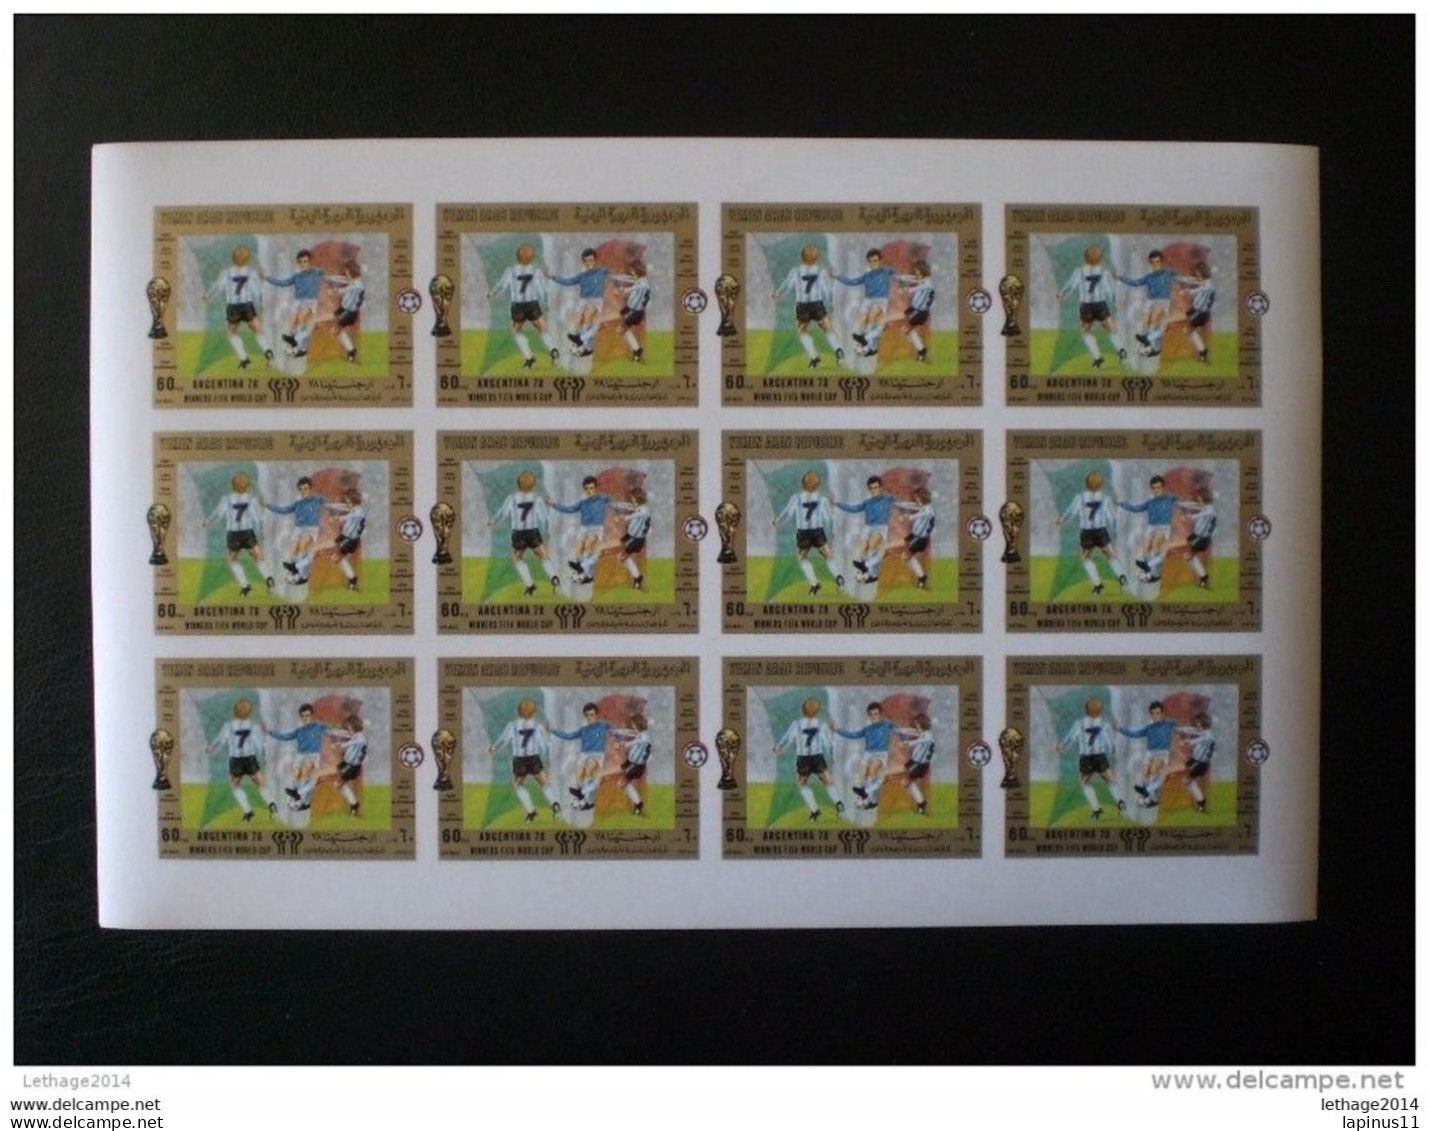 YEMEN 1980 Football World Argentina Cup Quarter Finalists - Match Scenes and Flags IMPERF RARE !! MNH 900,0 EURO